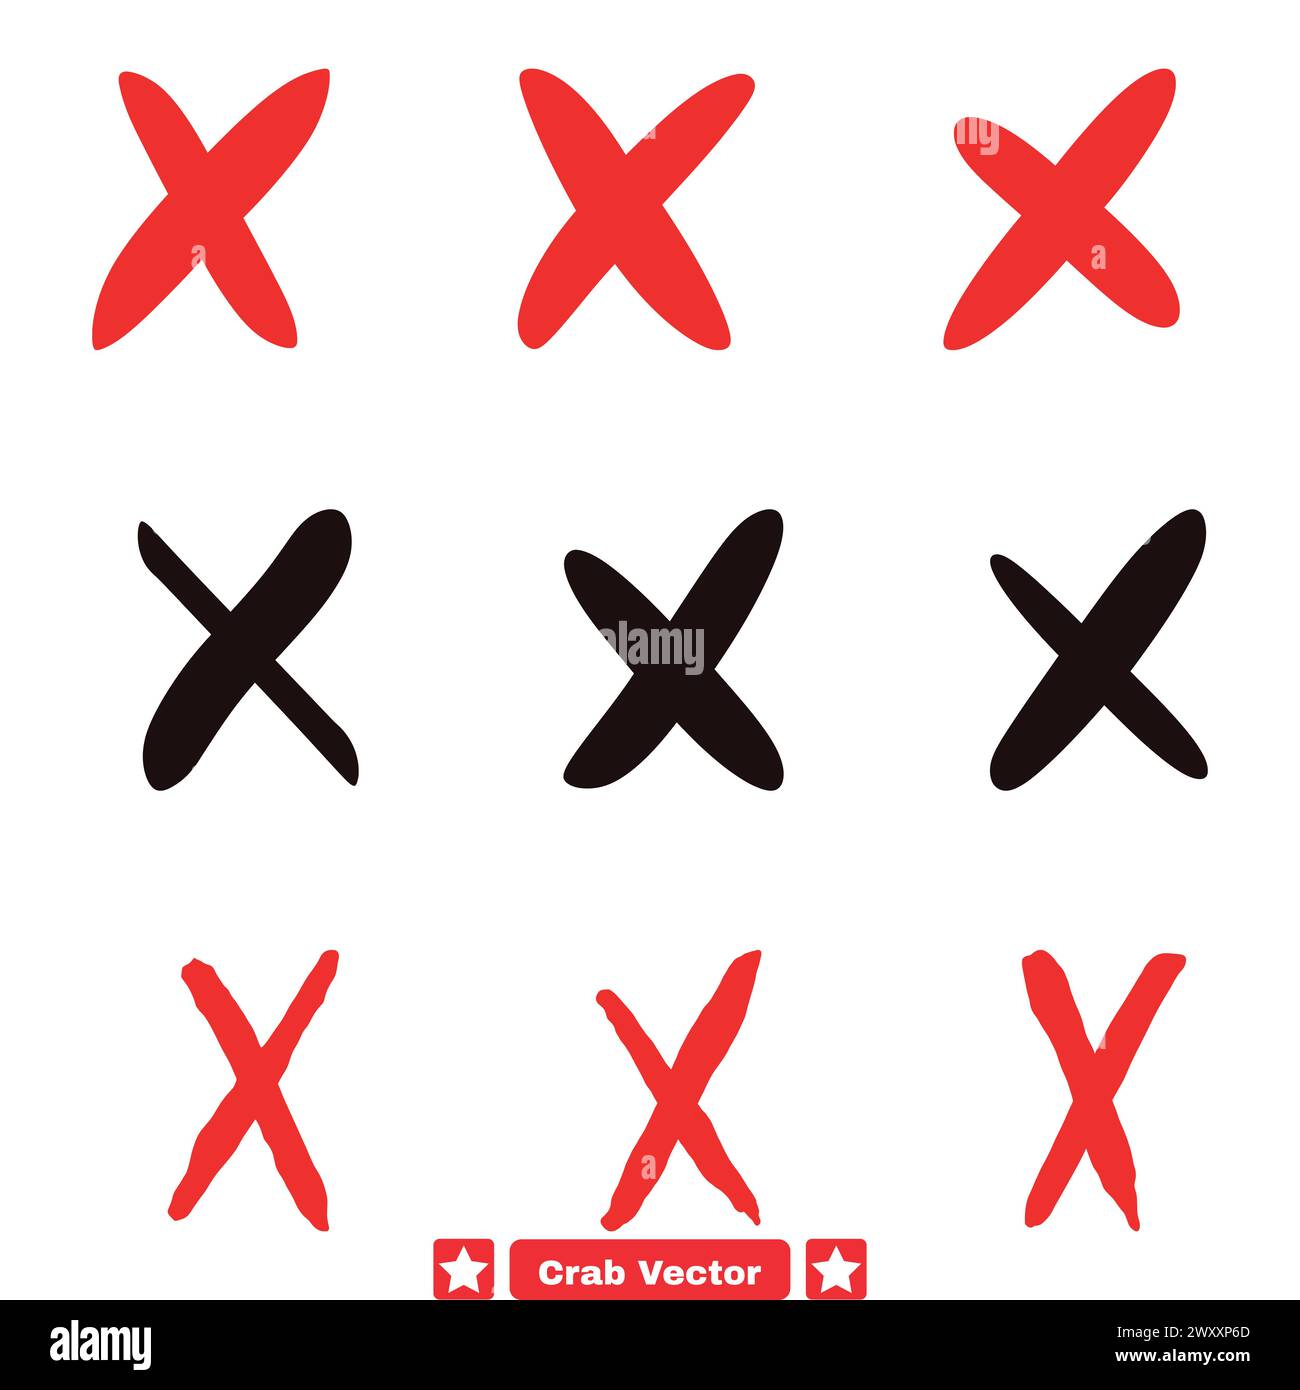 Incorrect Sign Vector Set Cross Icons Representing Mistakes, Inaccuracies, and Flawed Concepts Stock Vector